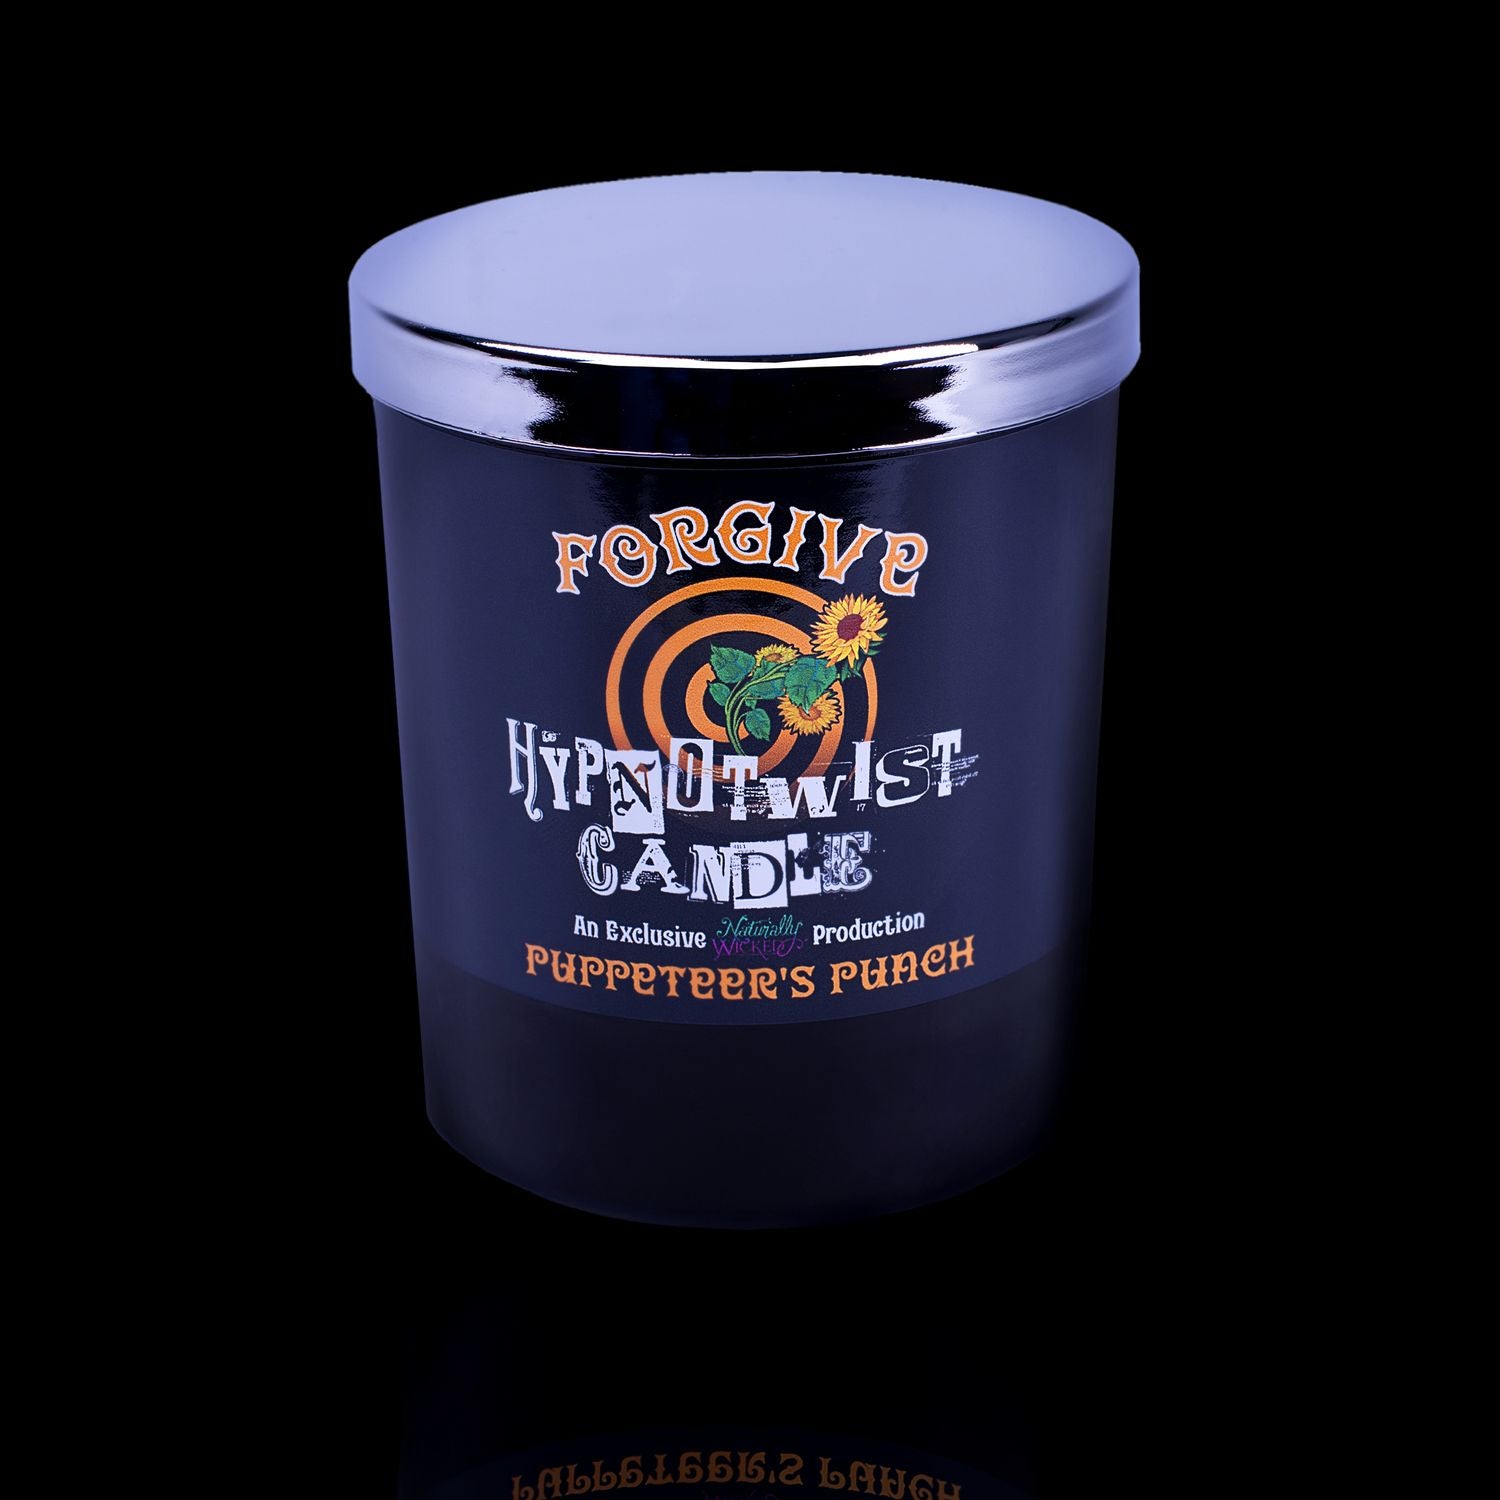 Learn To Forgive With The Naturally Wicked Hypnotwist Forgive Candle Featuring Plant-based Soy Orange Wax Scented With Puppeteer's Punch & Includes An Orange Aventurine Crystal Spinning Top & Mirrored Lid